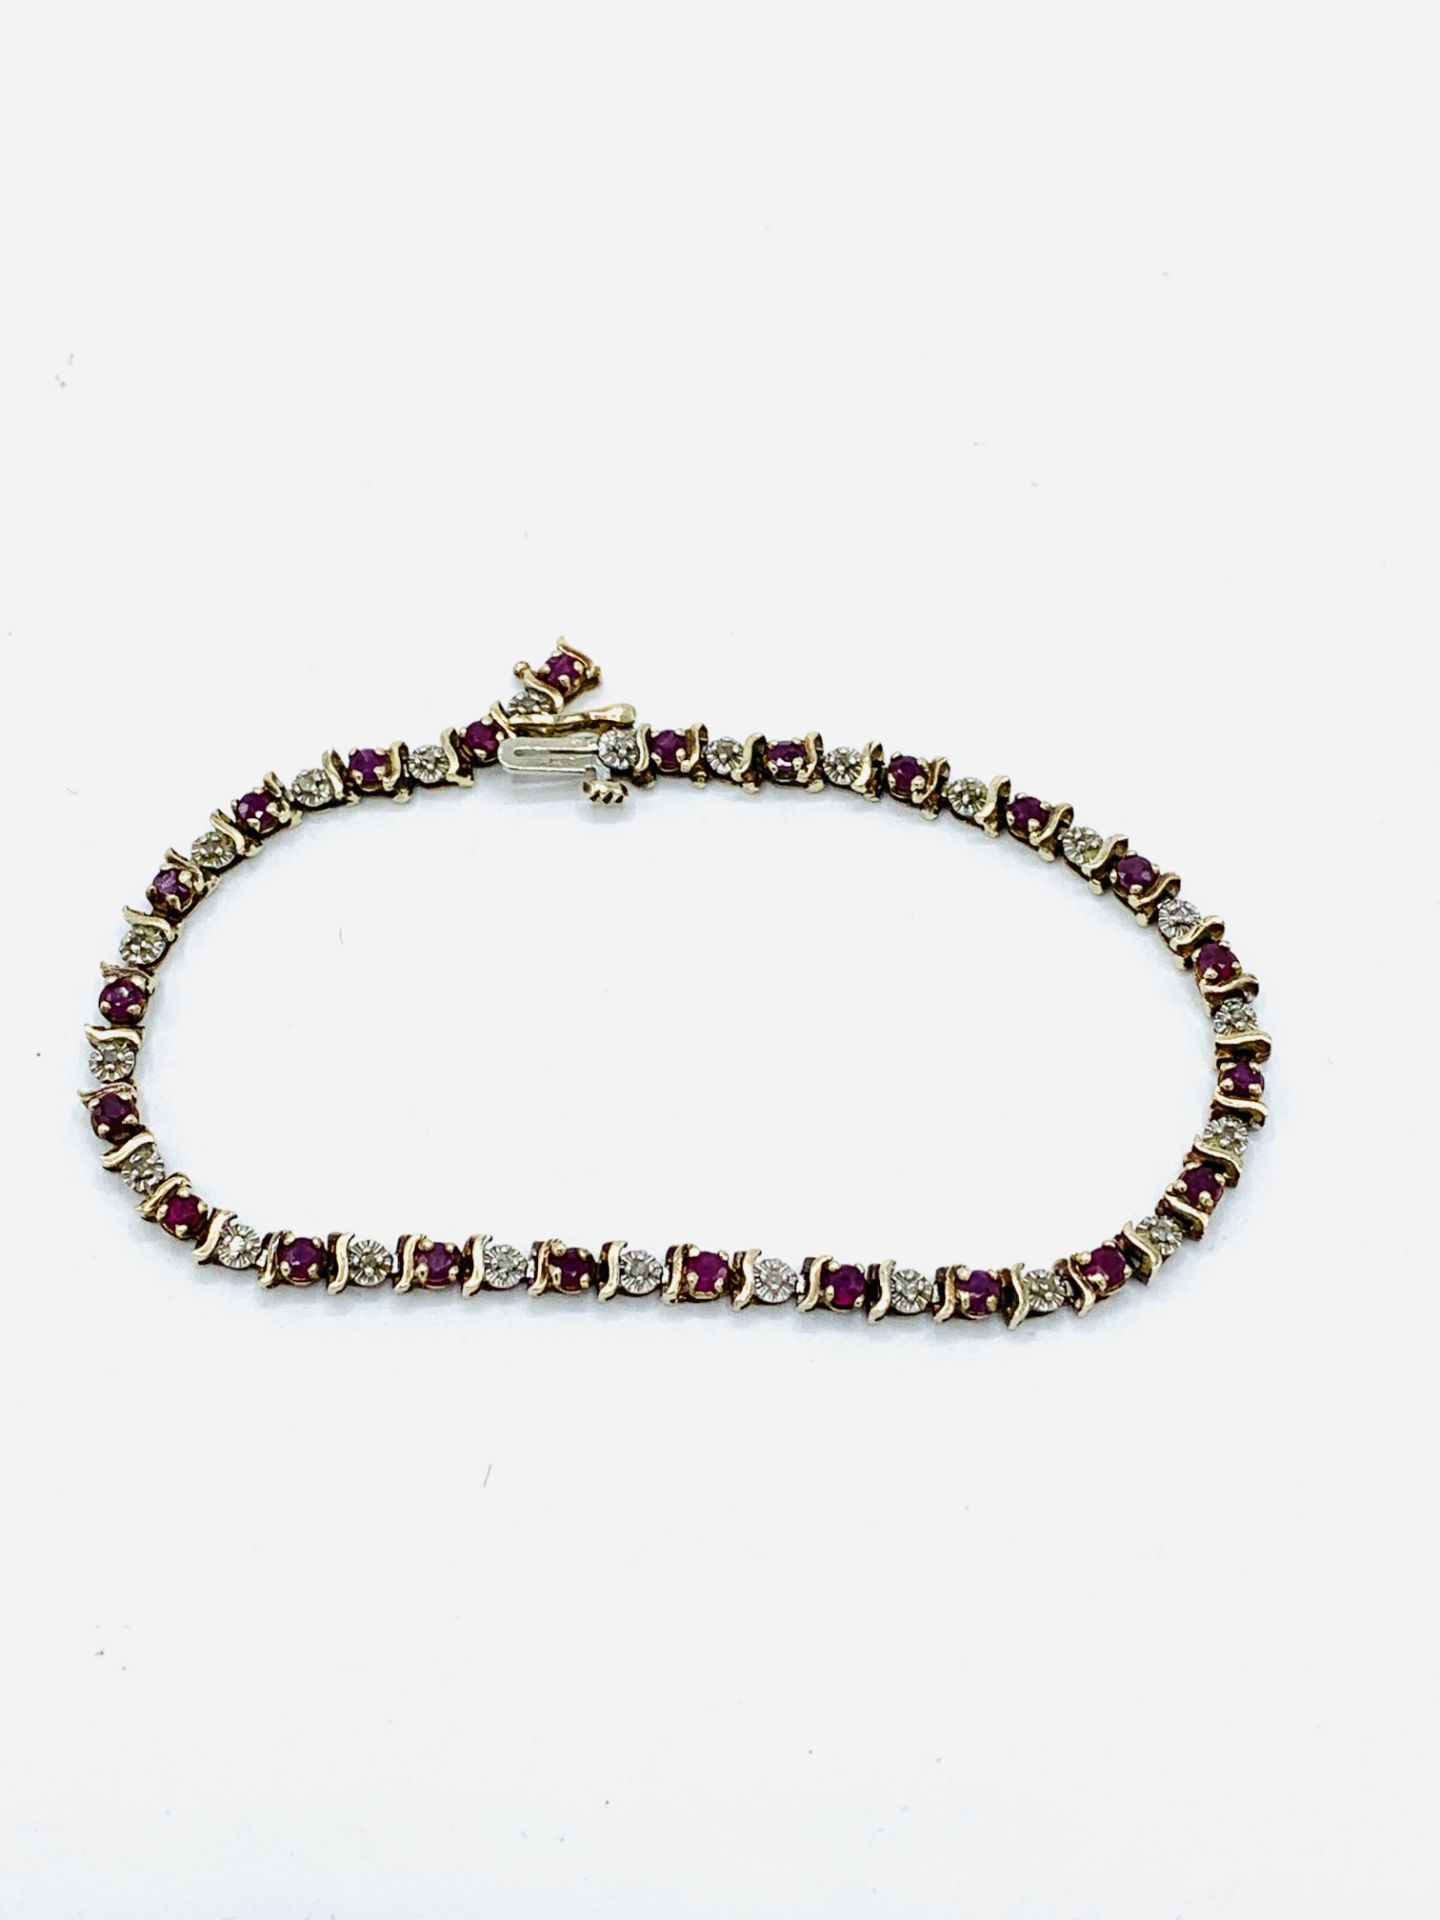 9ct gold tennis bracelet with diamonds and rubies. - Image 2 of 4